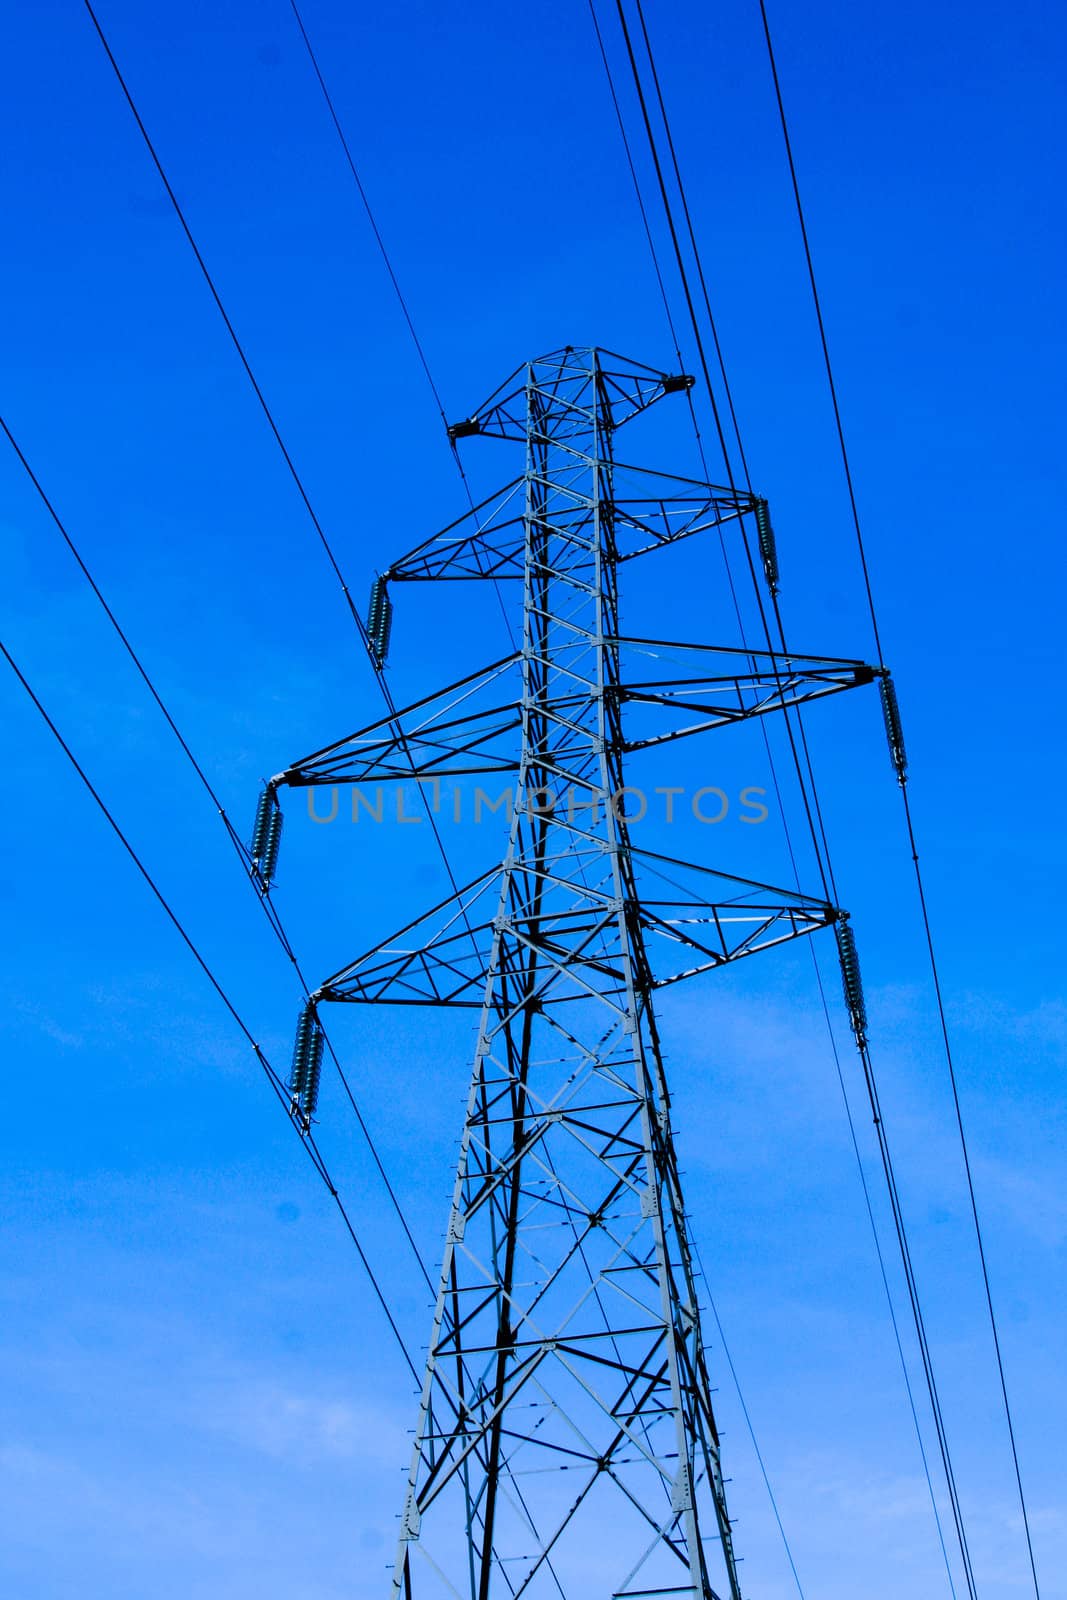  Power transmission tower carrying electricity from different parts of country